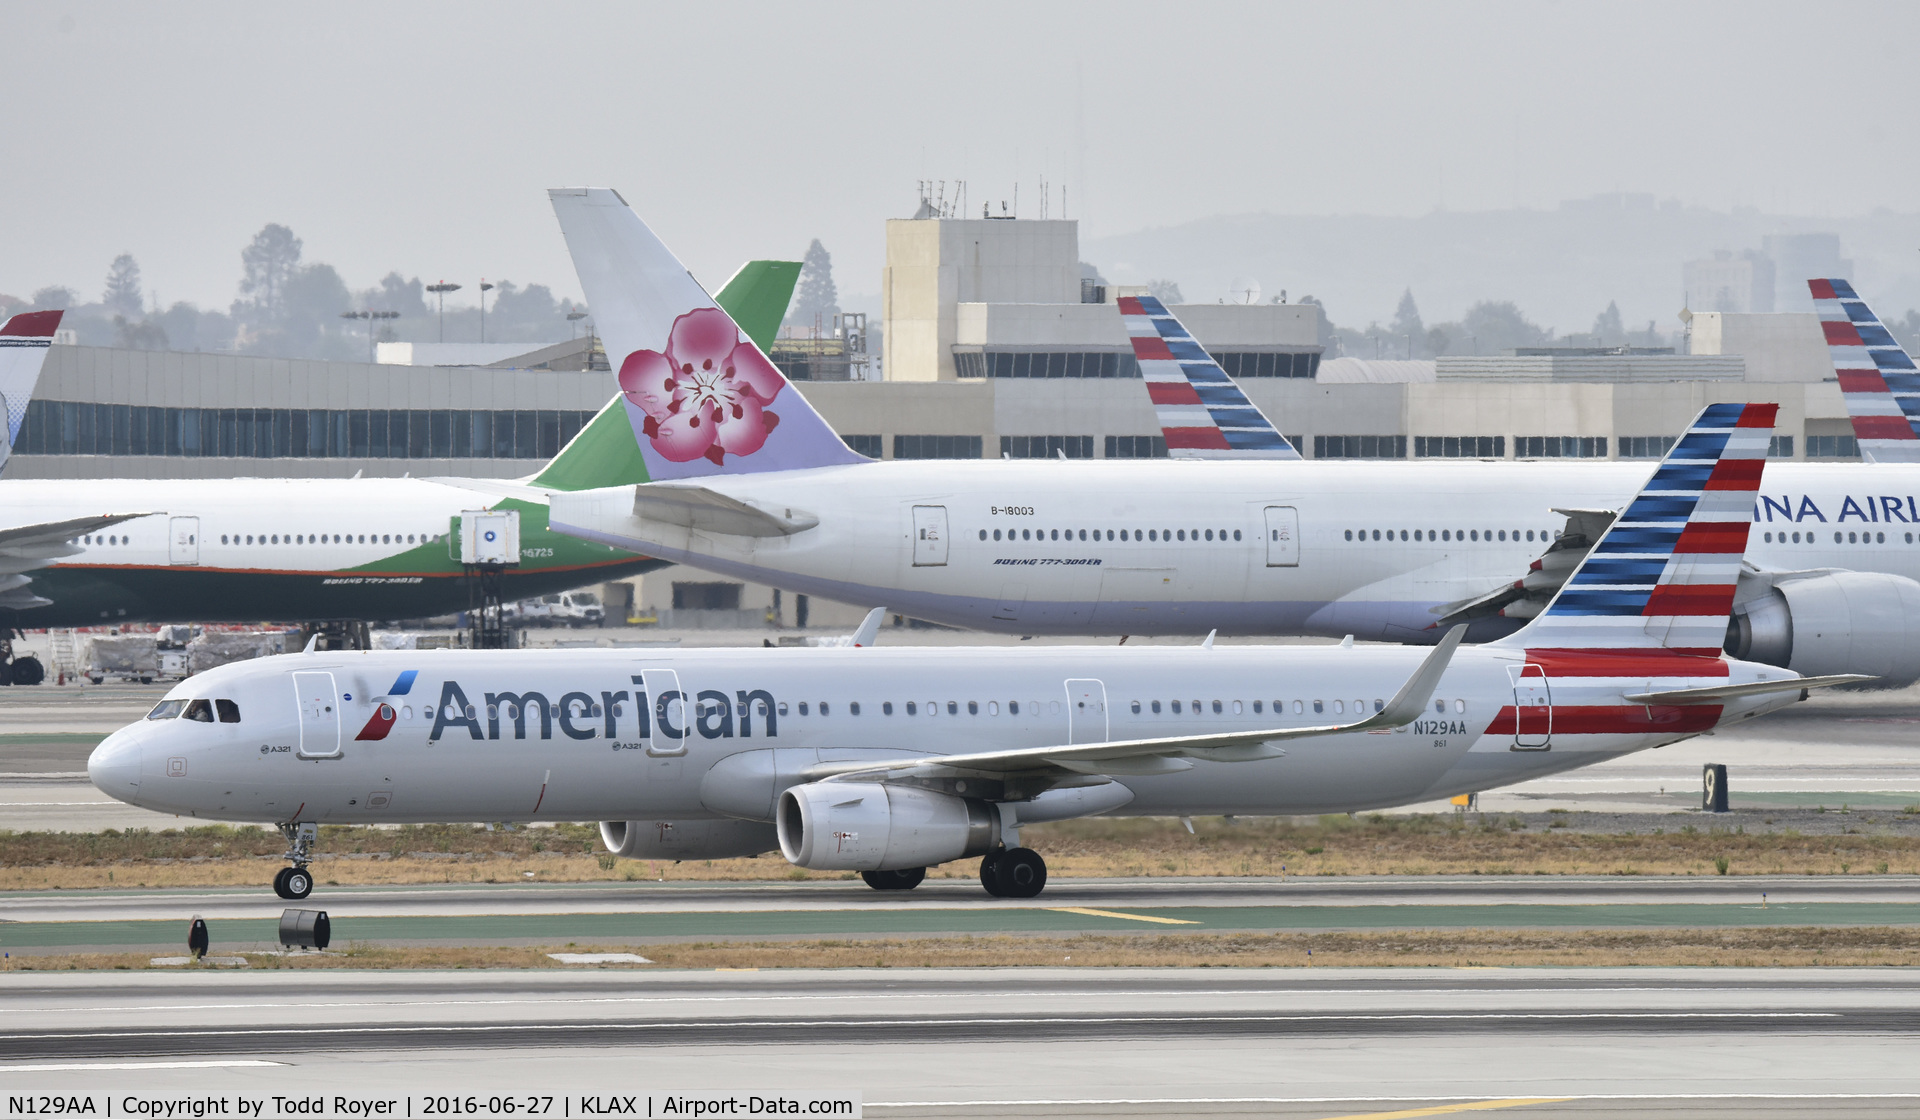 N129AA, 2014 Airbus A321-231 C/N 6401, Arriving at LAX on 25L